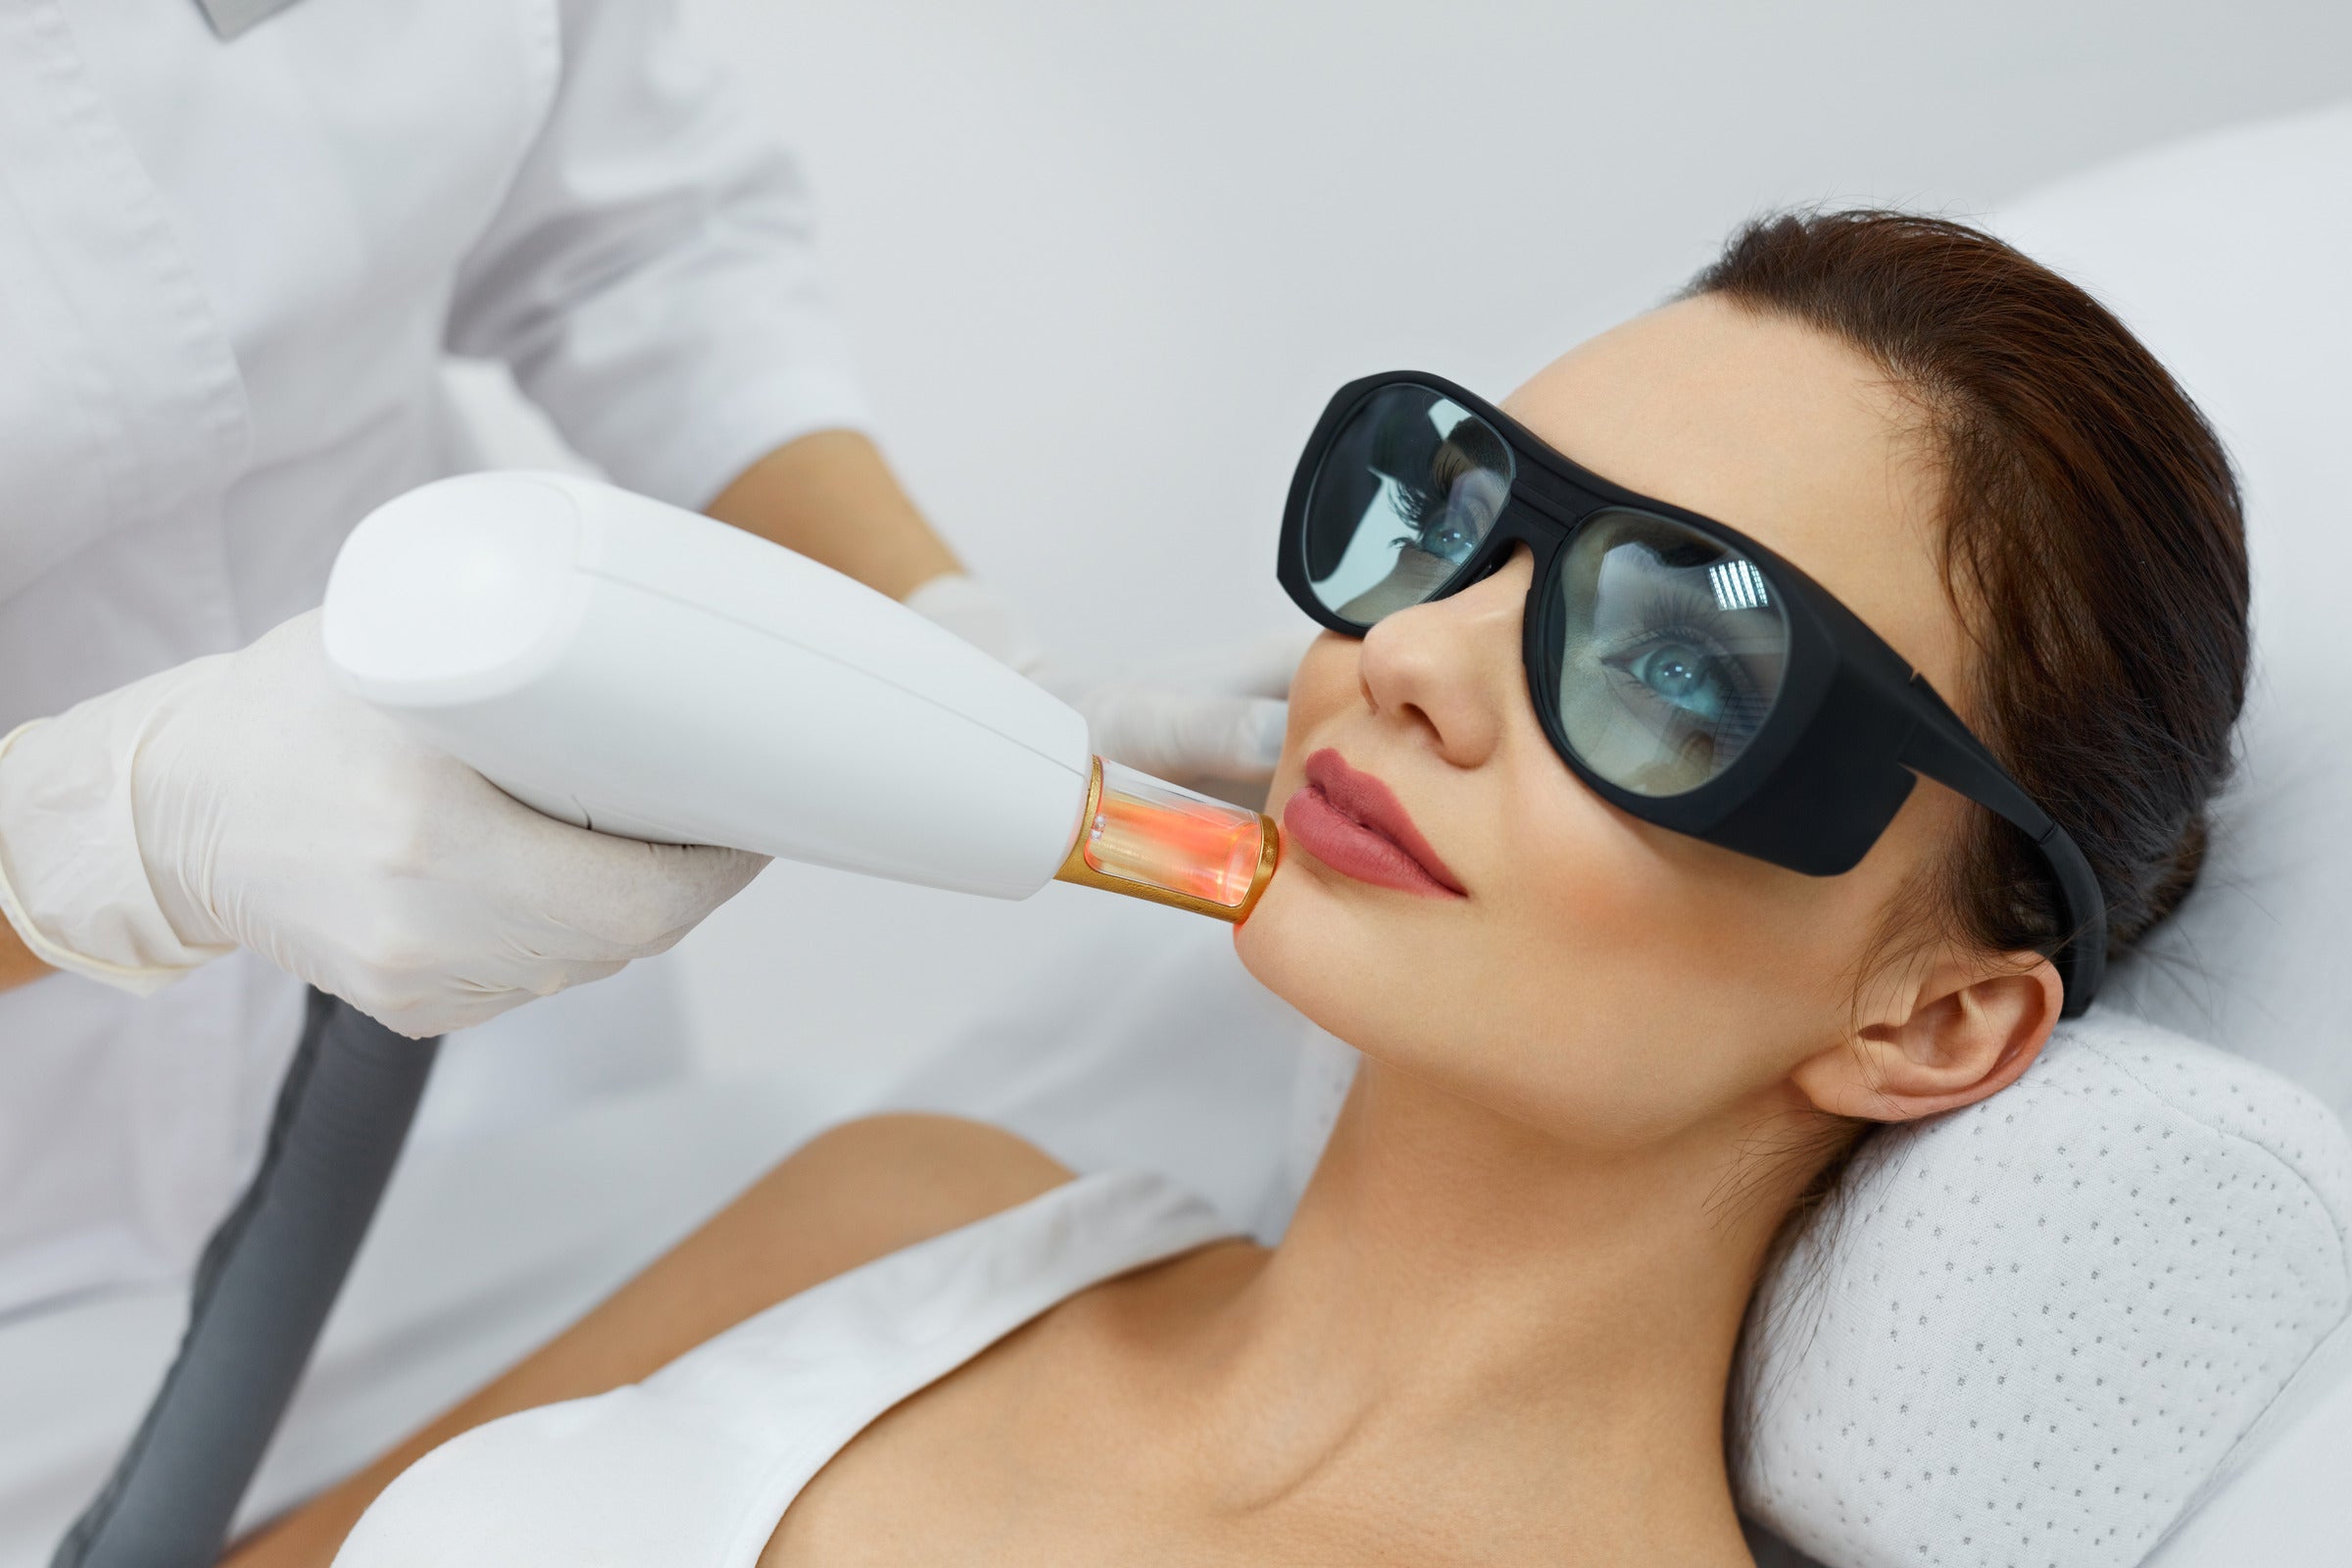 Risk of Infection and Scarring Disadvantages of Laser Resurfacing